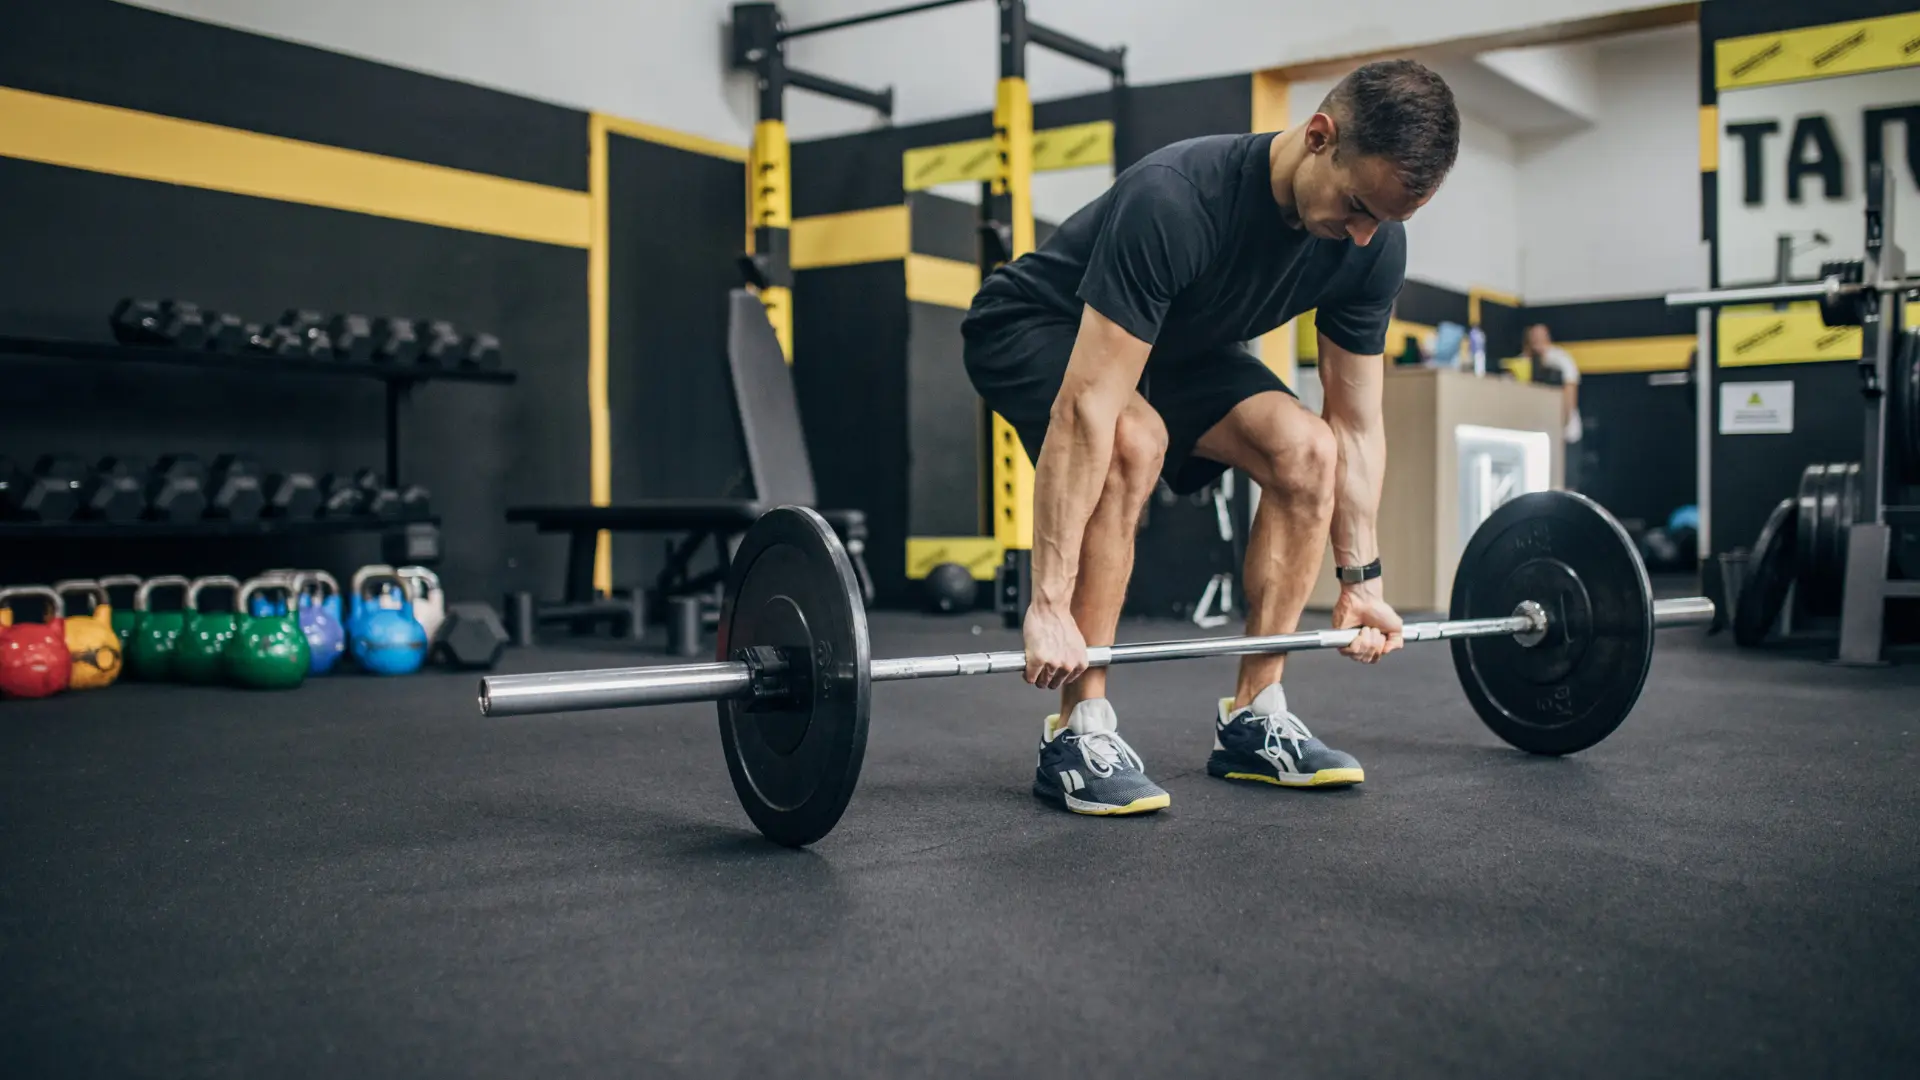 Increase your deadlift in the most effective way